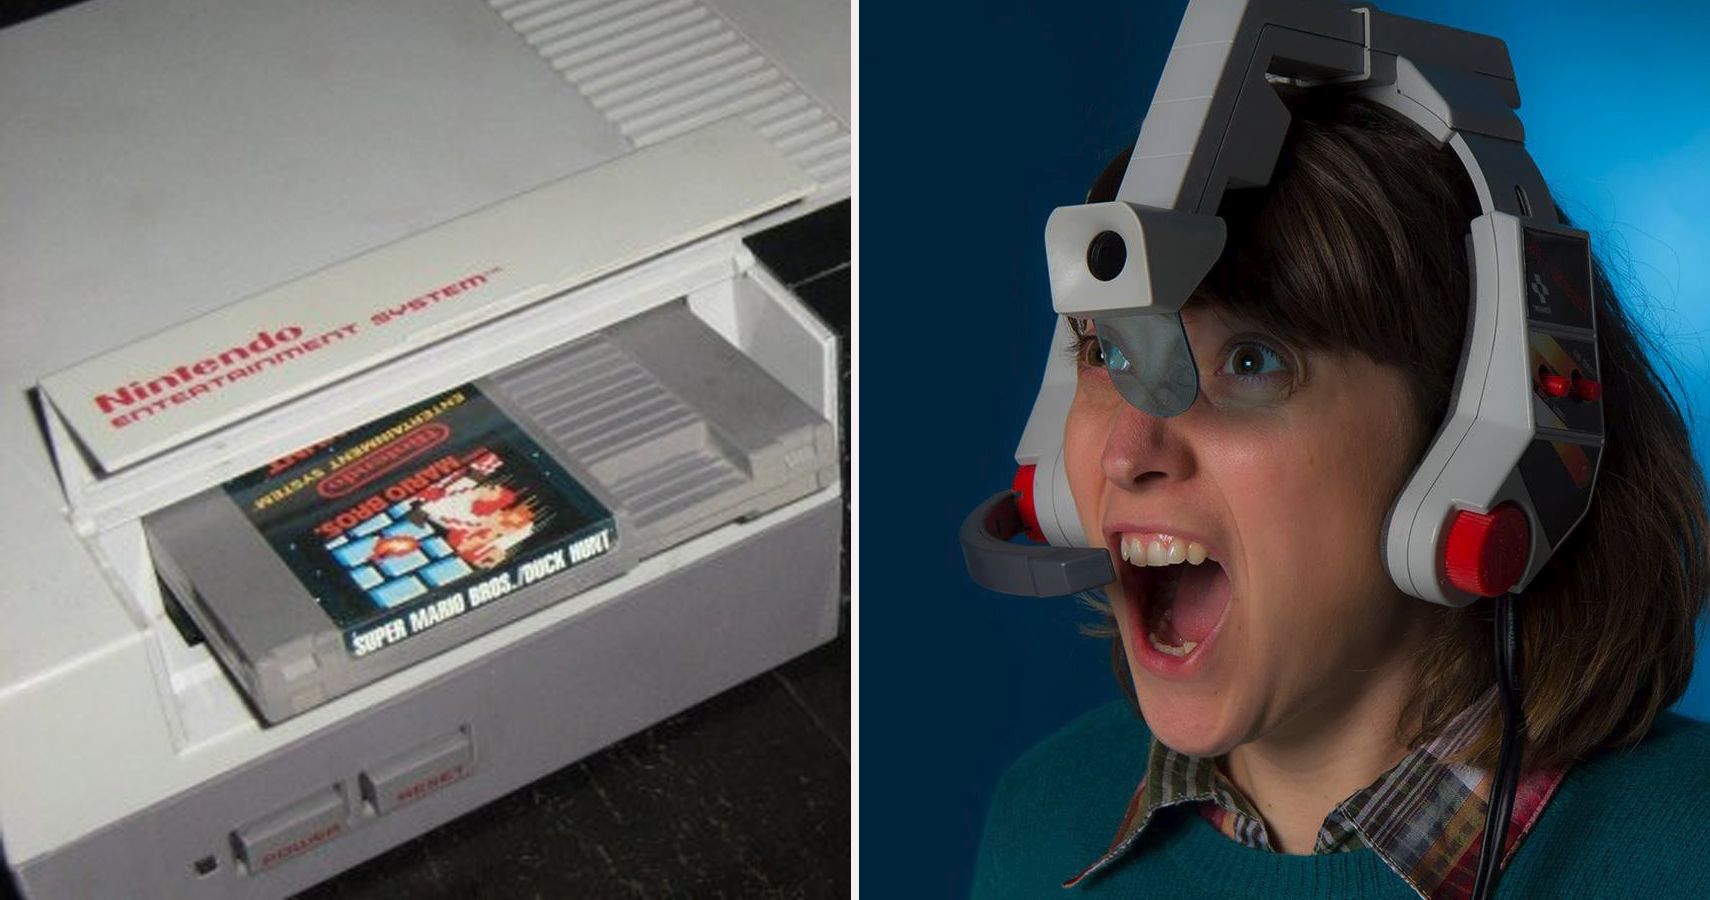 20 Awesome Things You Had NO IDEA The NES Could Do